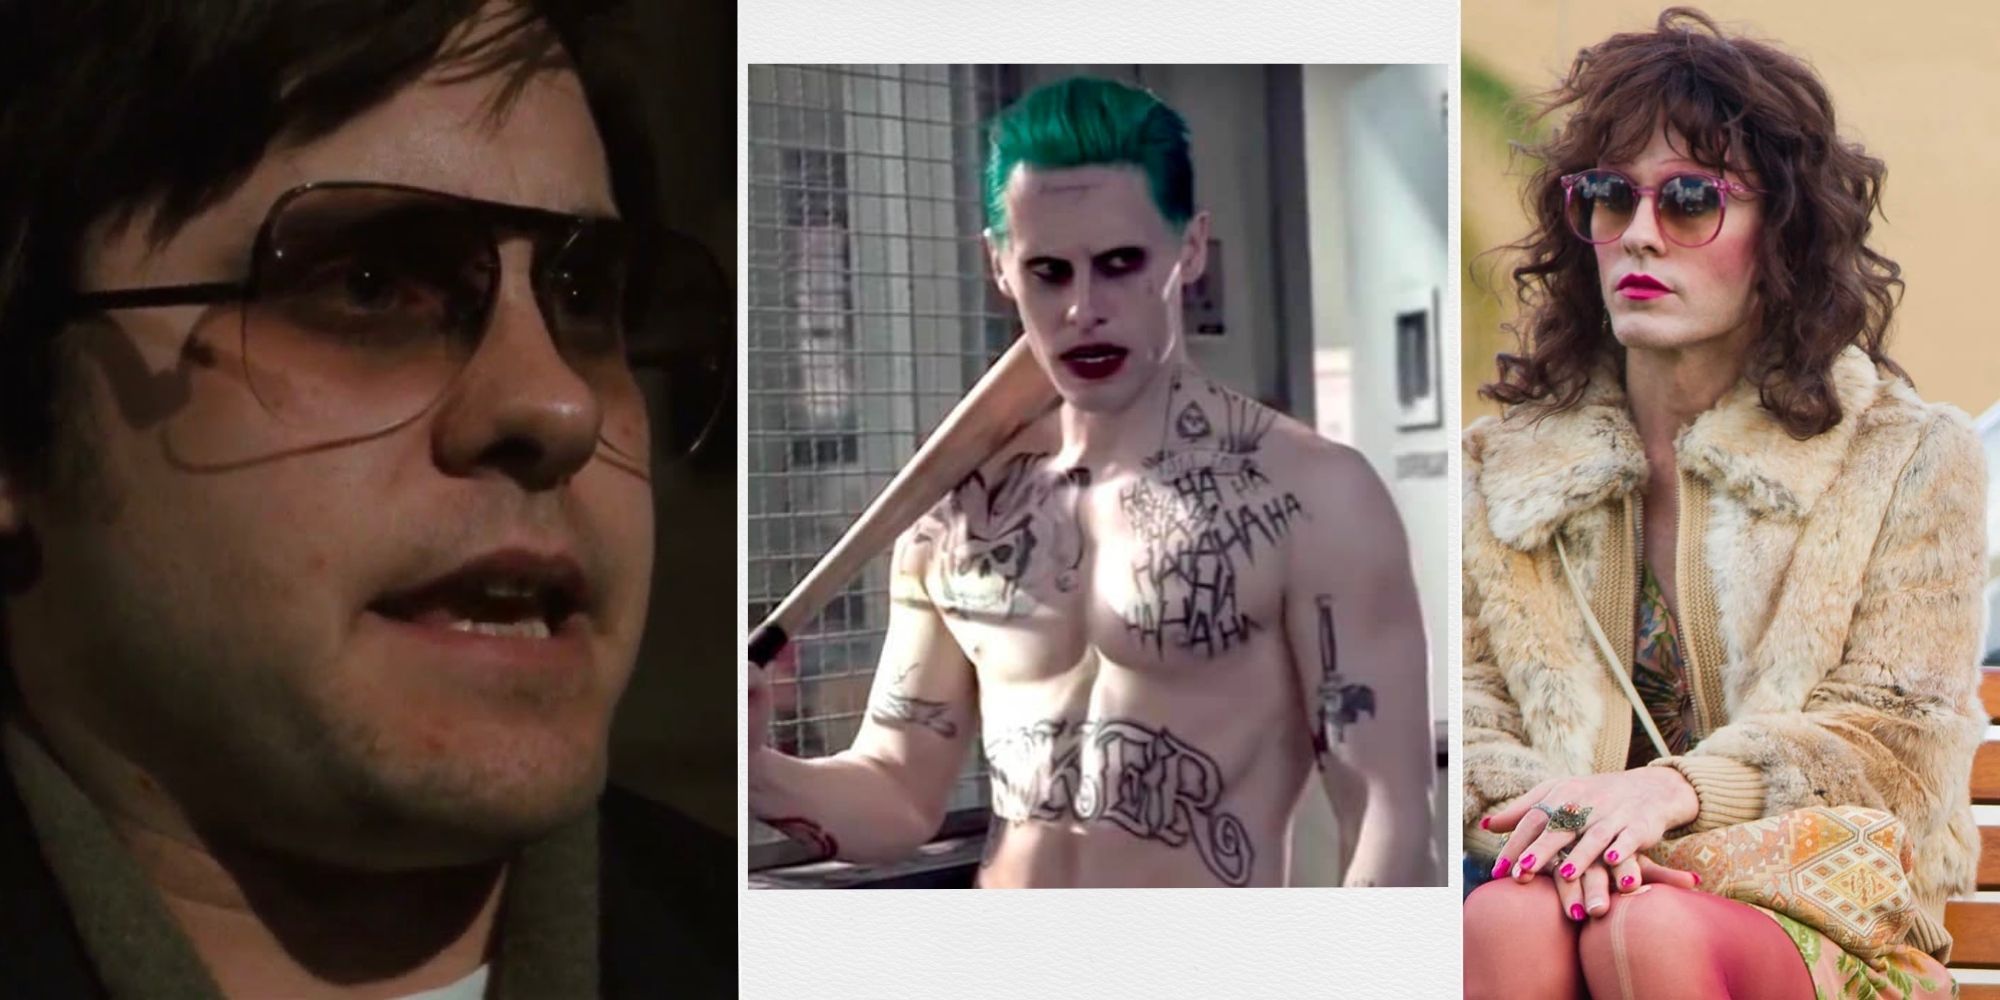 Jared Leto in Chapter 27, Suicide Squad and Dallas Buyers Club